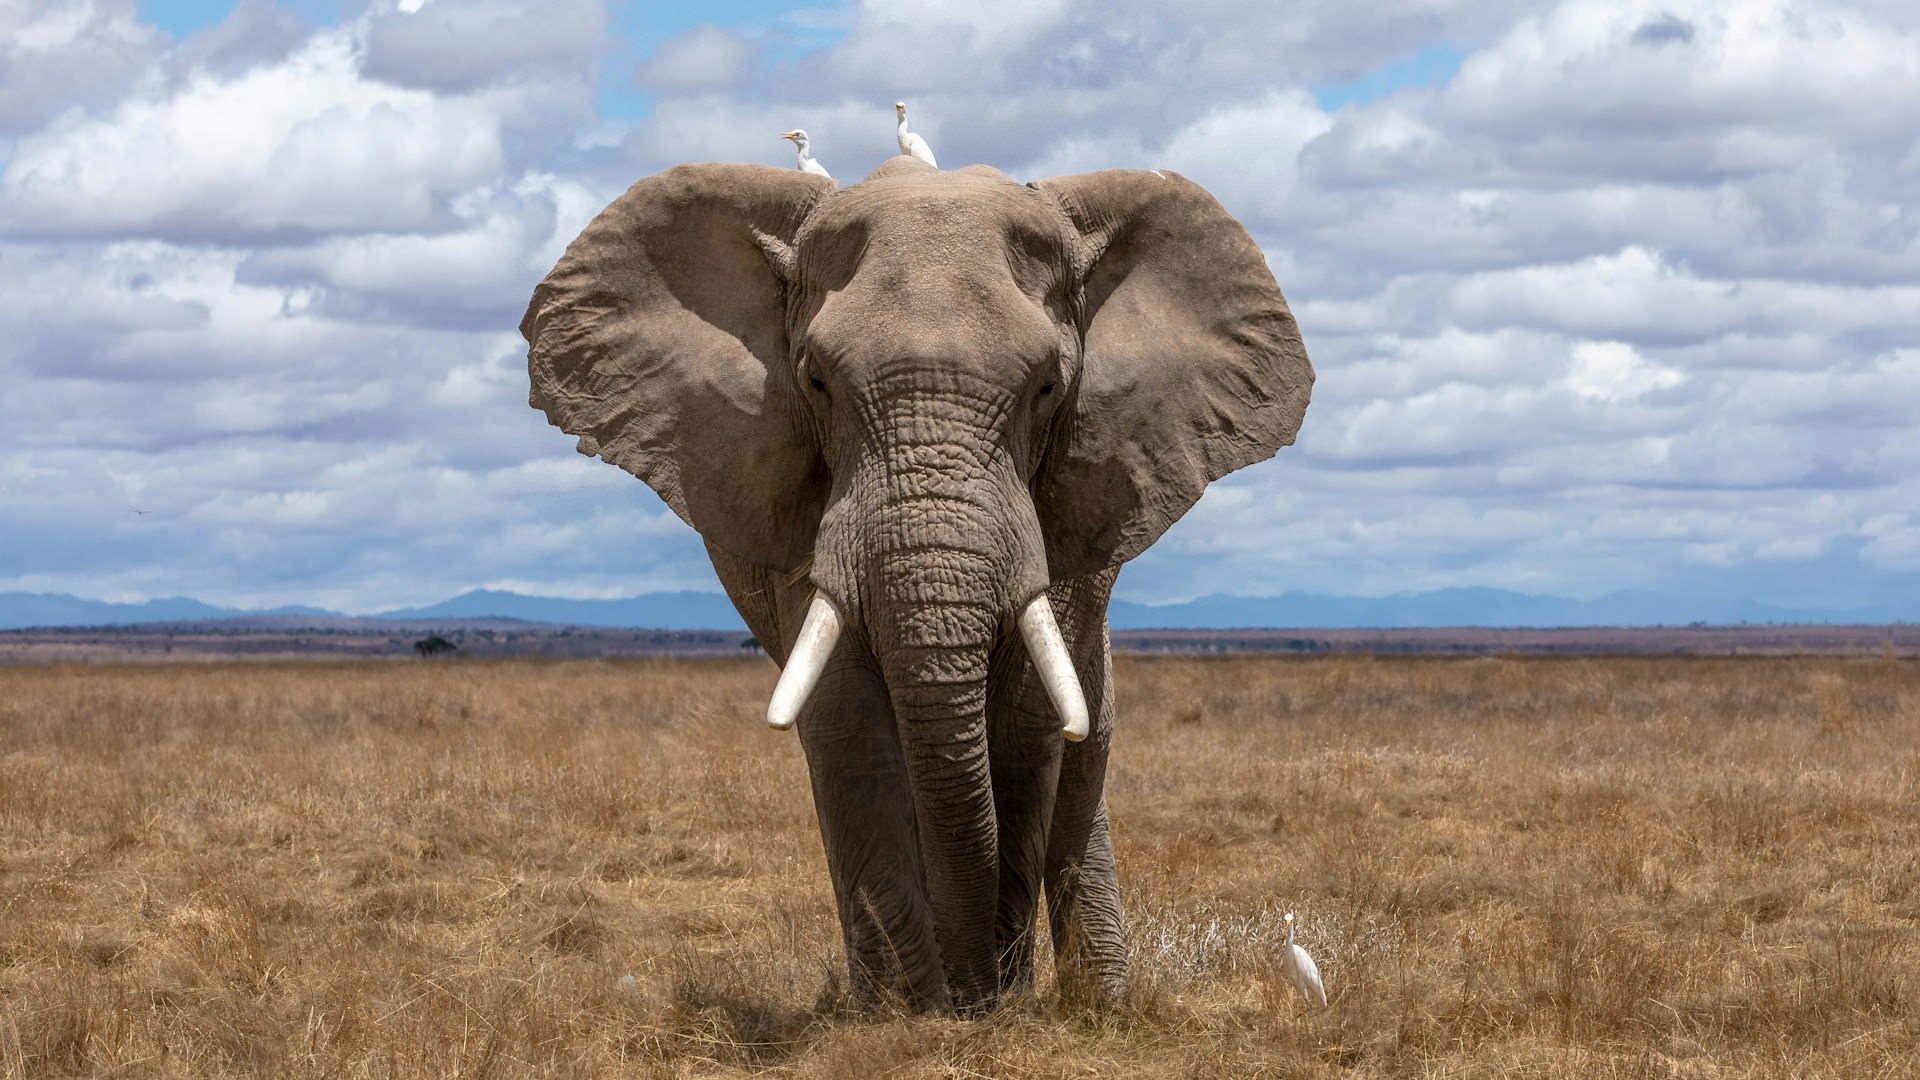 <a href="https://www.bbcearth.com/news/elephant-gestation-period-longer-than-any-living-mammal" rel="noreferrer">African elephants hold the record for the longest gestation period of any mammal on Earth</a>, carrying their young for an astonishing 22 months – nearly two years. This extended period of development is a testament to the sheer size and complexity of these majestic creatures. However, even this remarkable feat is overshadowed by some species of sharks, which can carry their offspring for over three years, further exemplifying the incredible diversity of reproductive strategies found in nature.